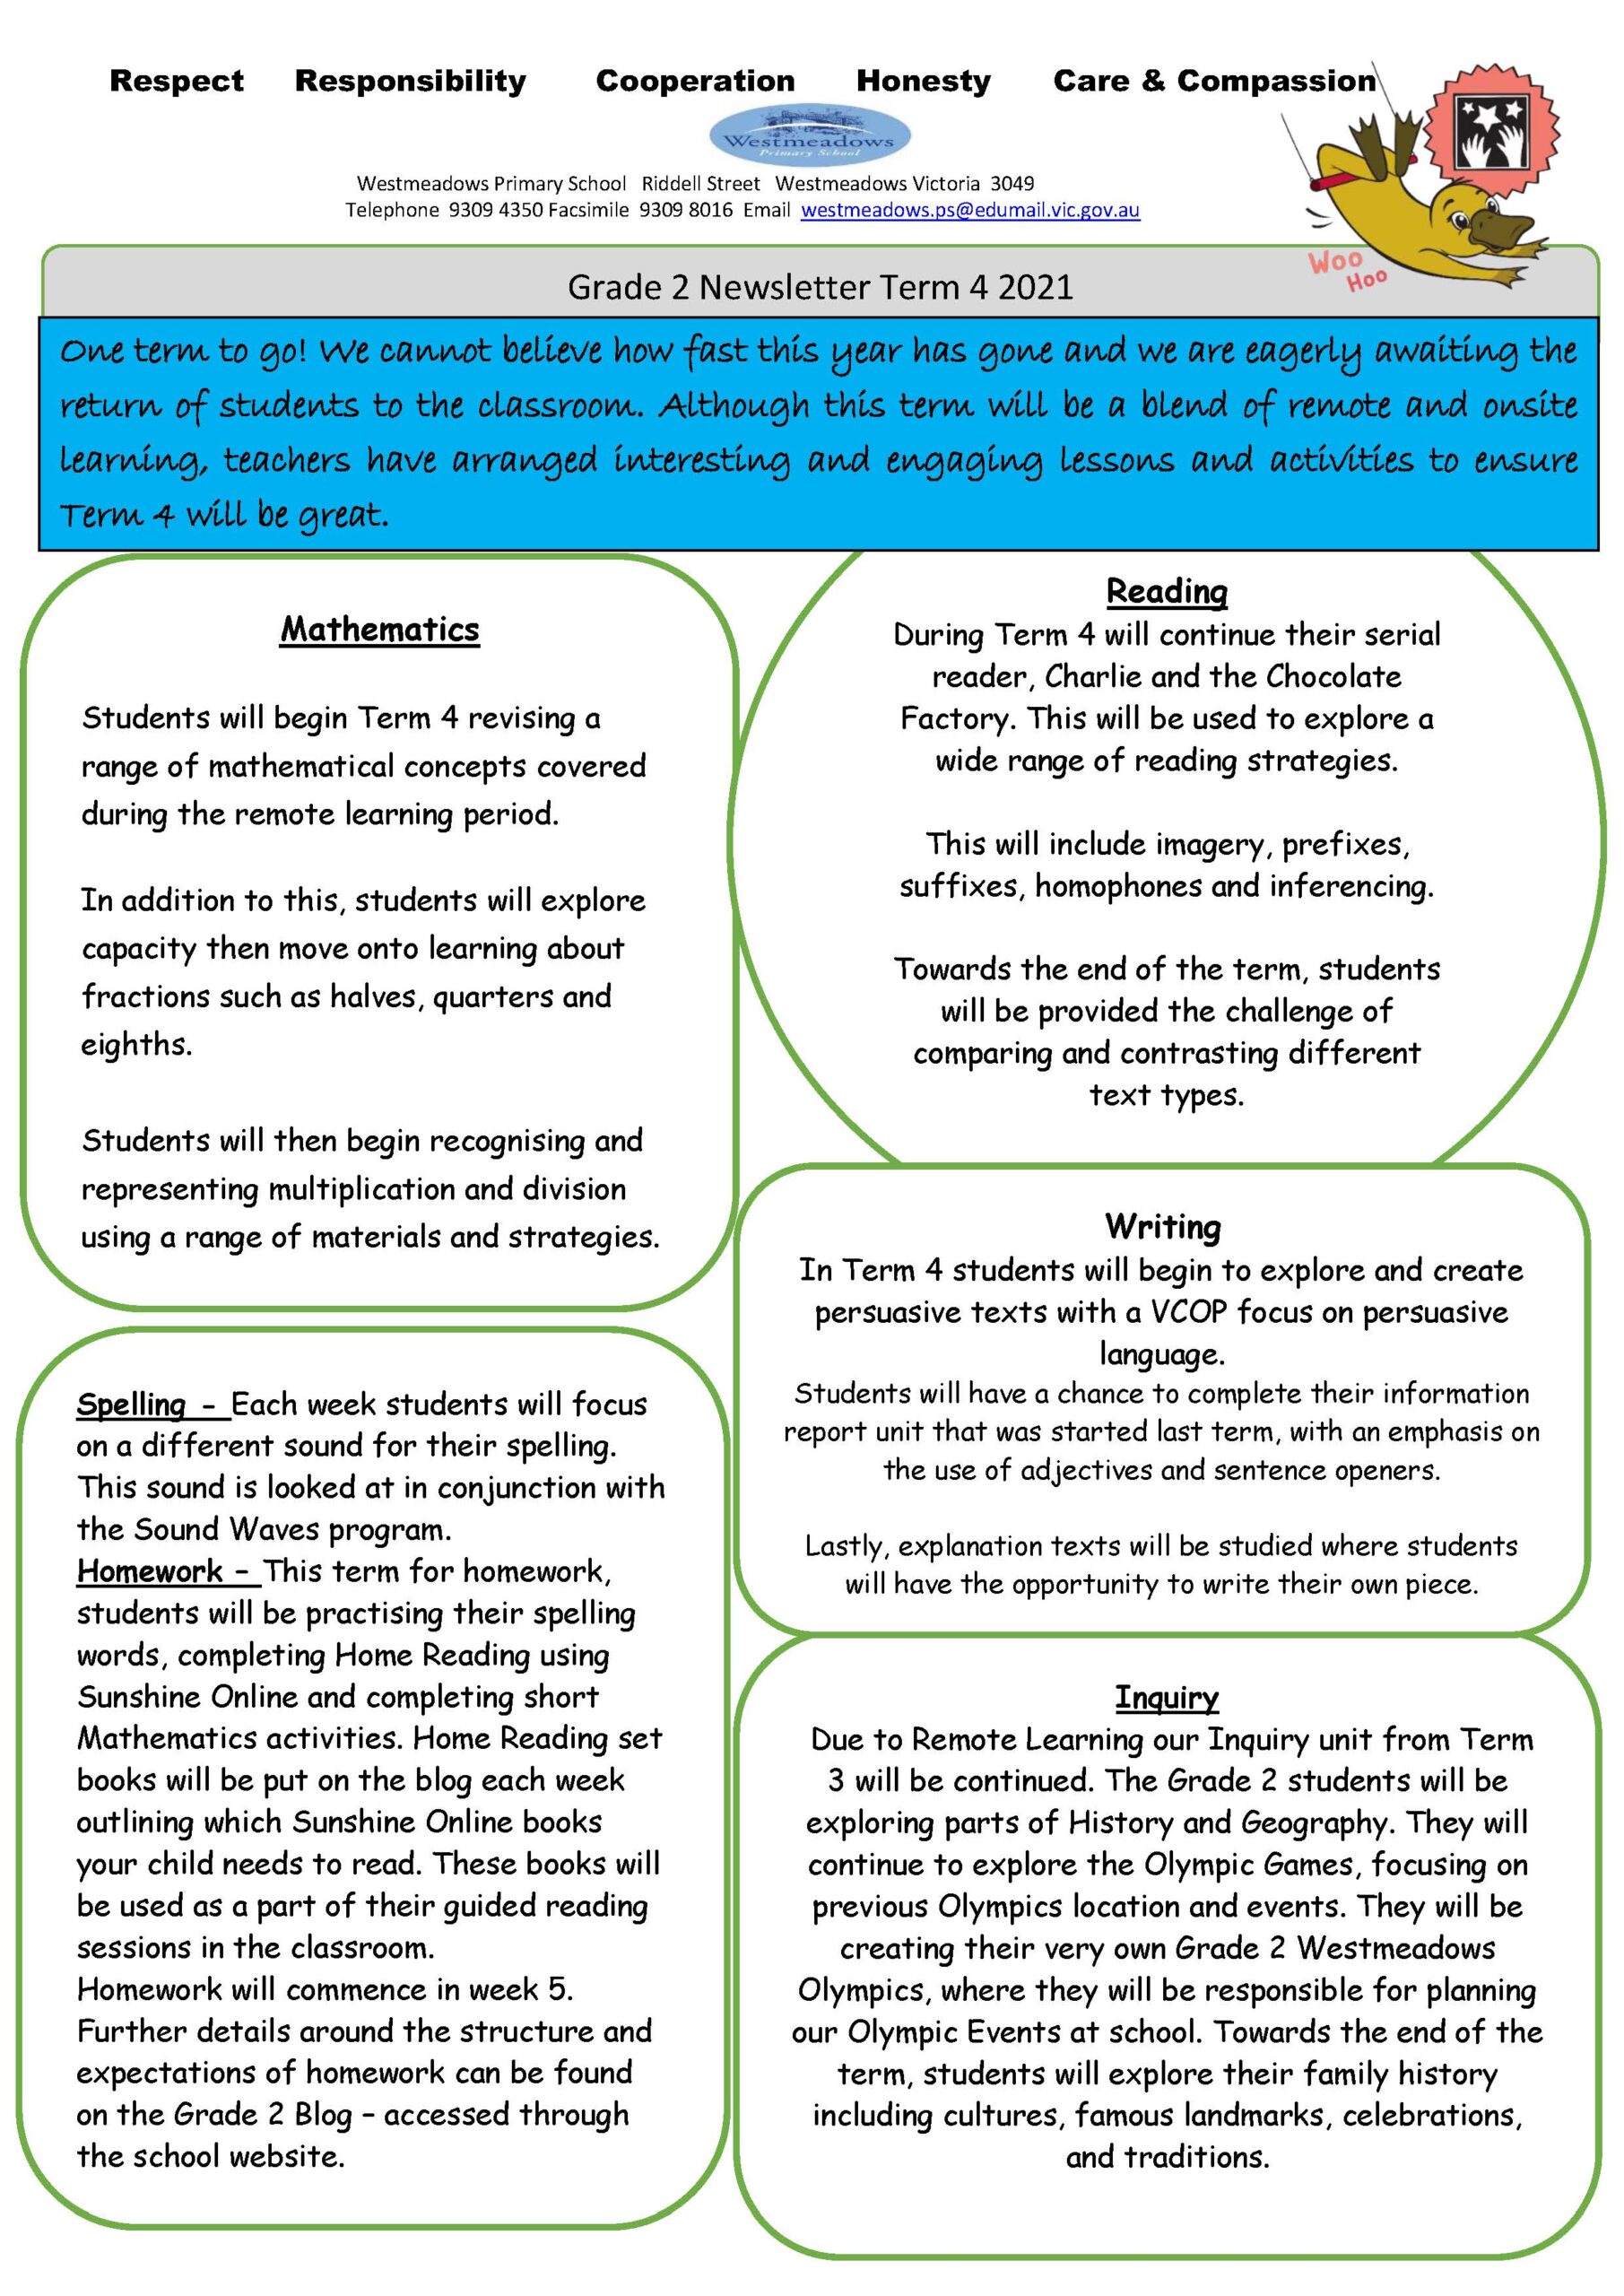 Grade 2 Term 4 newsletter 2021_Page_1